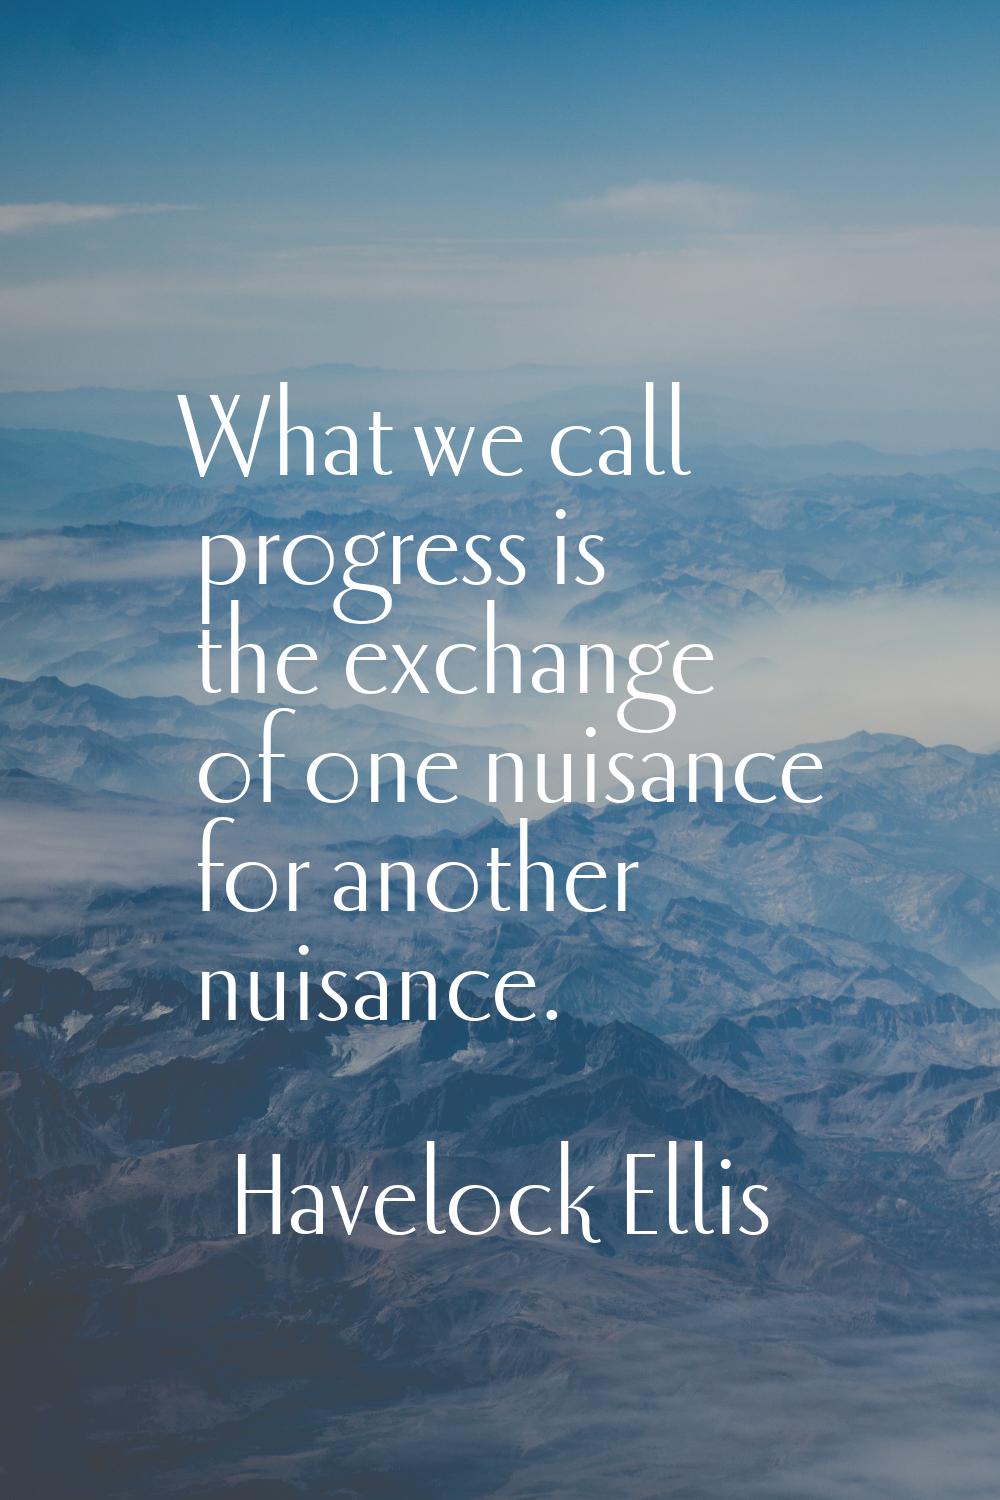 What we call progress is the exchange of one nuisance for another nuisance.